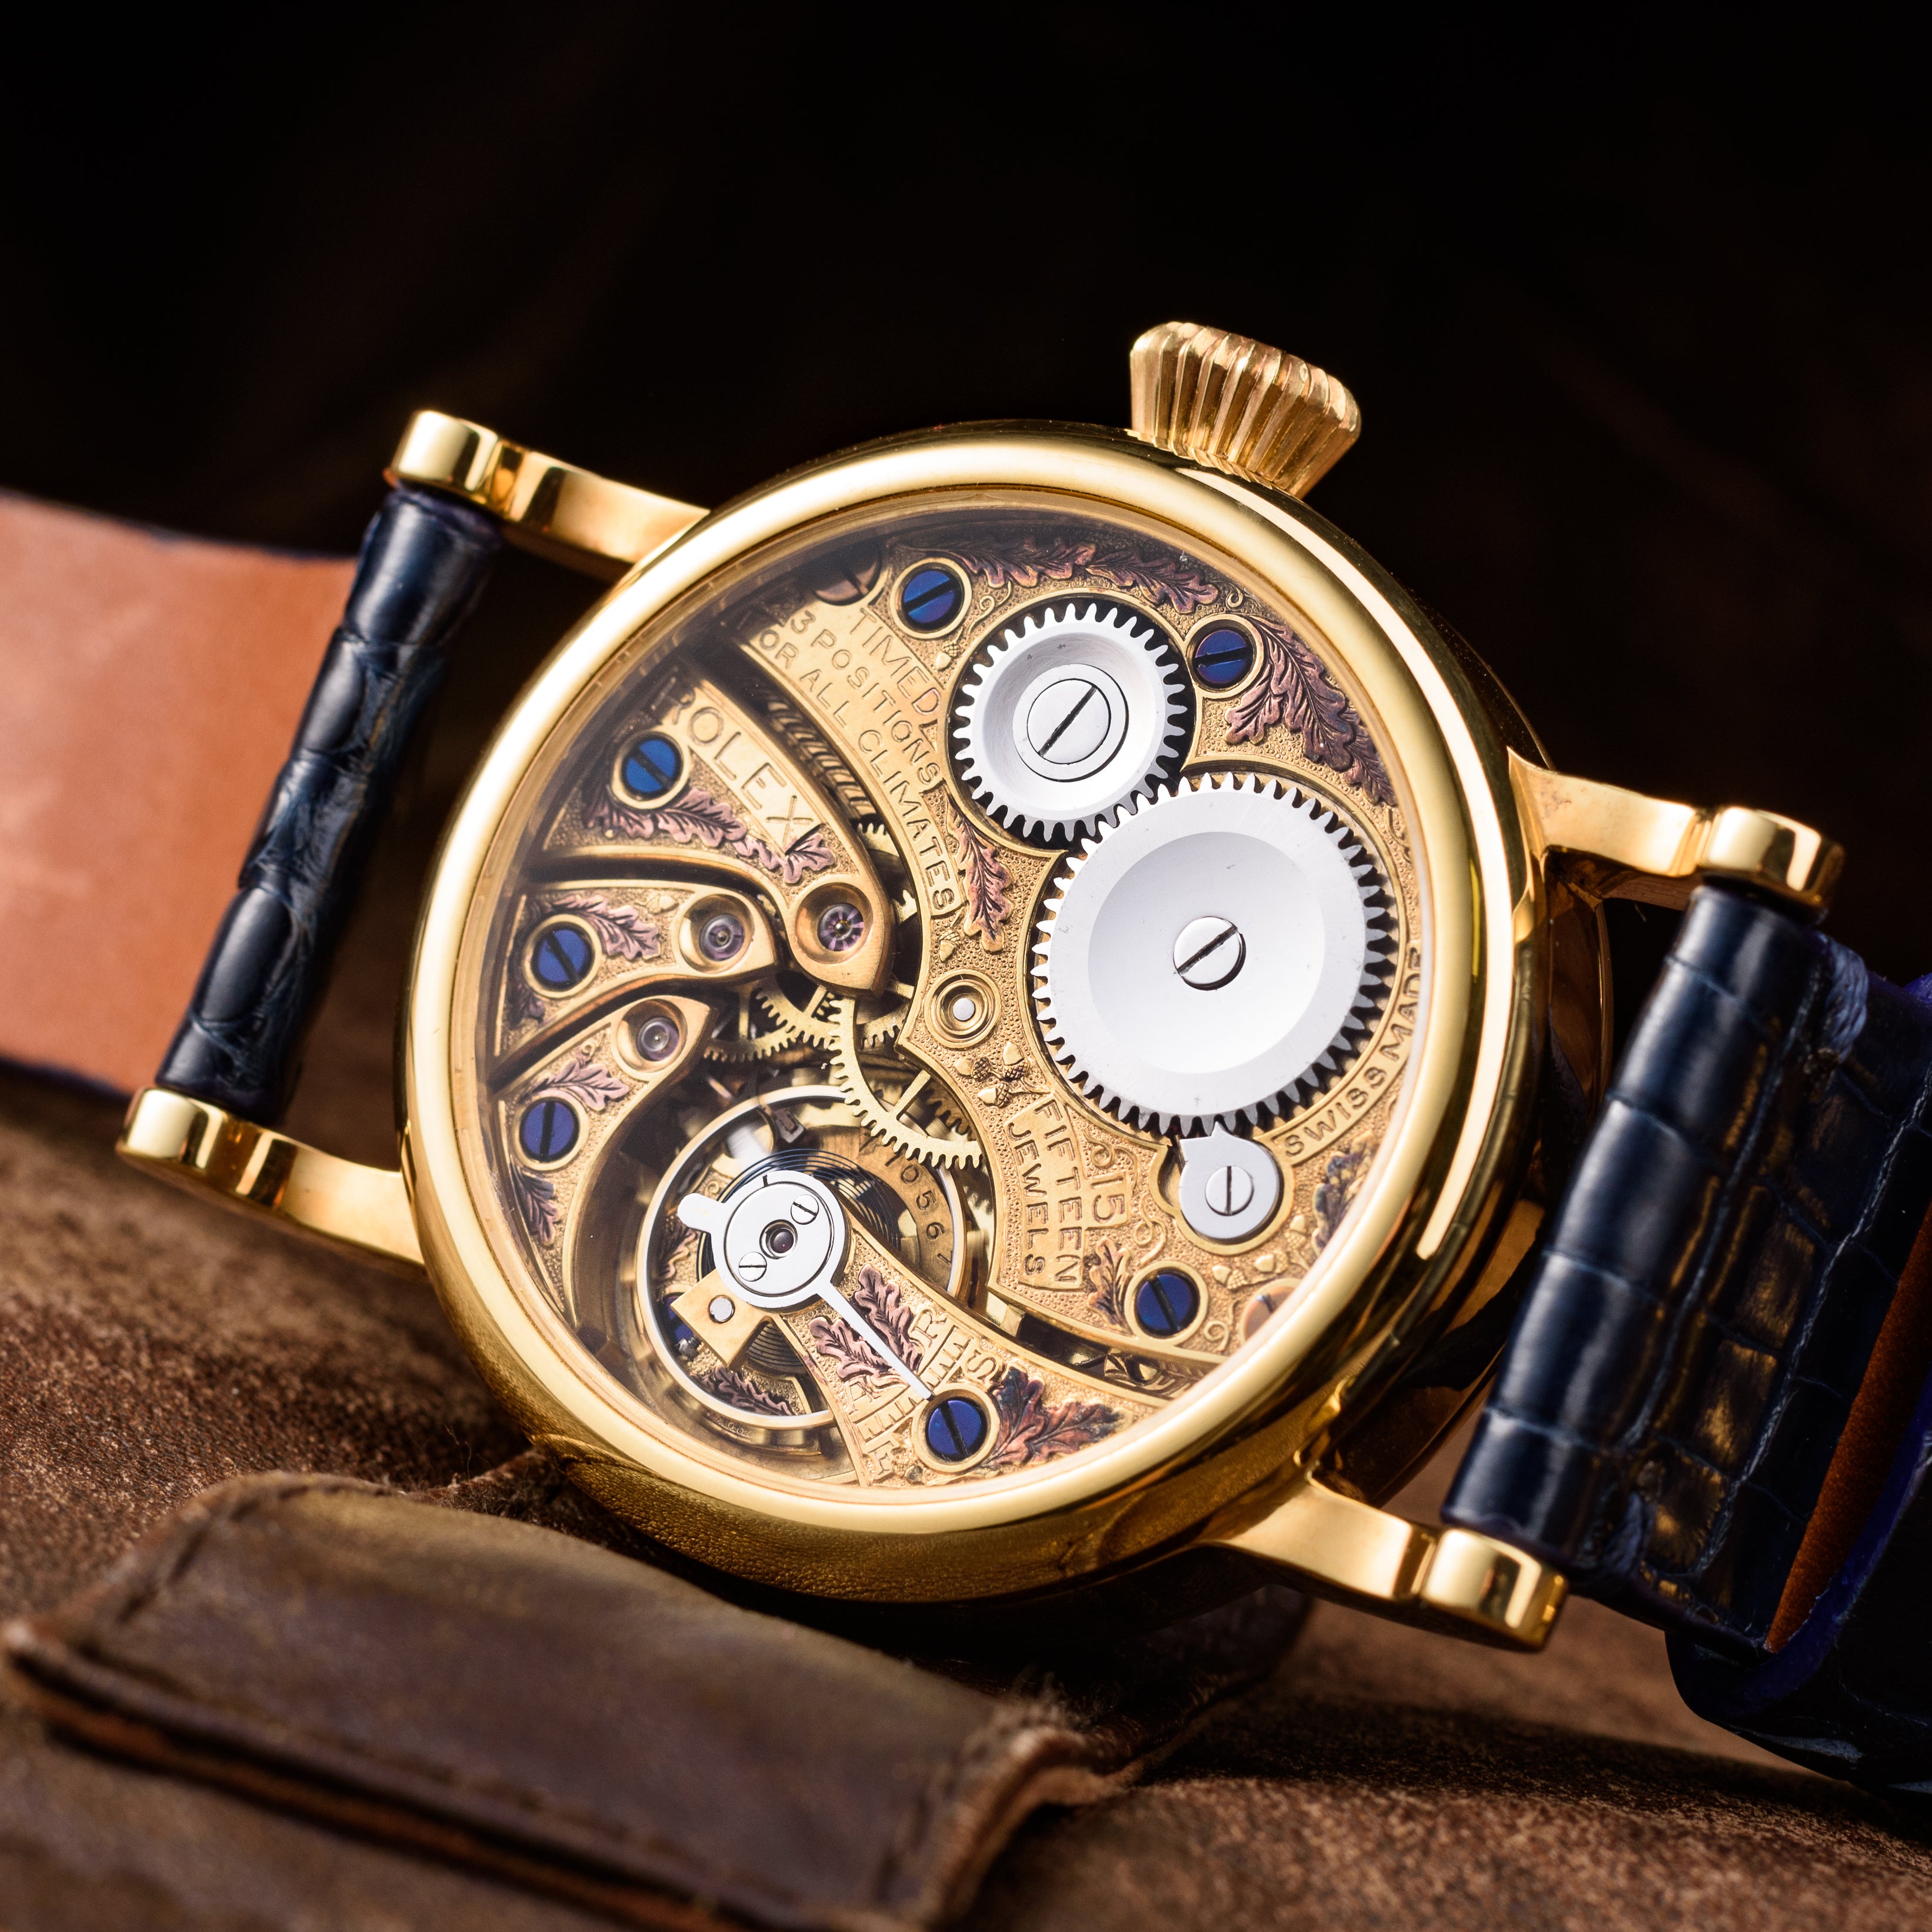 Rolex - Family tree, 585 Gold or brass(gold plated) case, movement of 1920s, exclusive custom skeleton